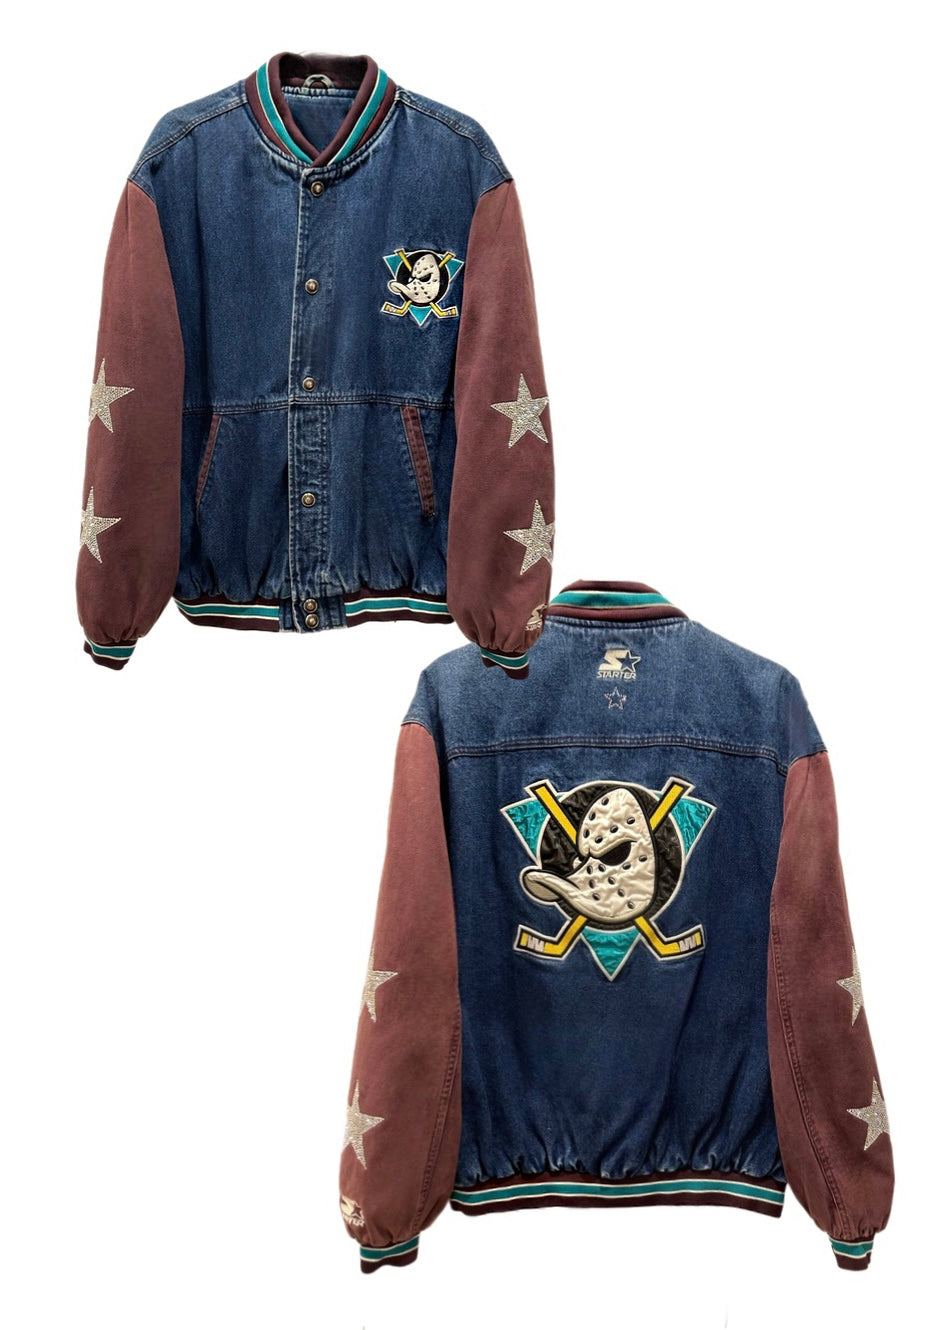 Anaheim Ducks, Mighty Duck NHL, “Rare Find” One of a Kind Vintage Jacket with Crystal Star Design